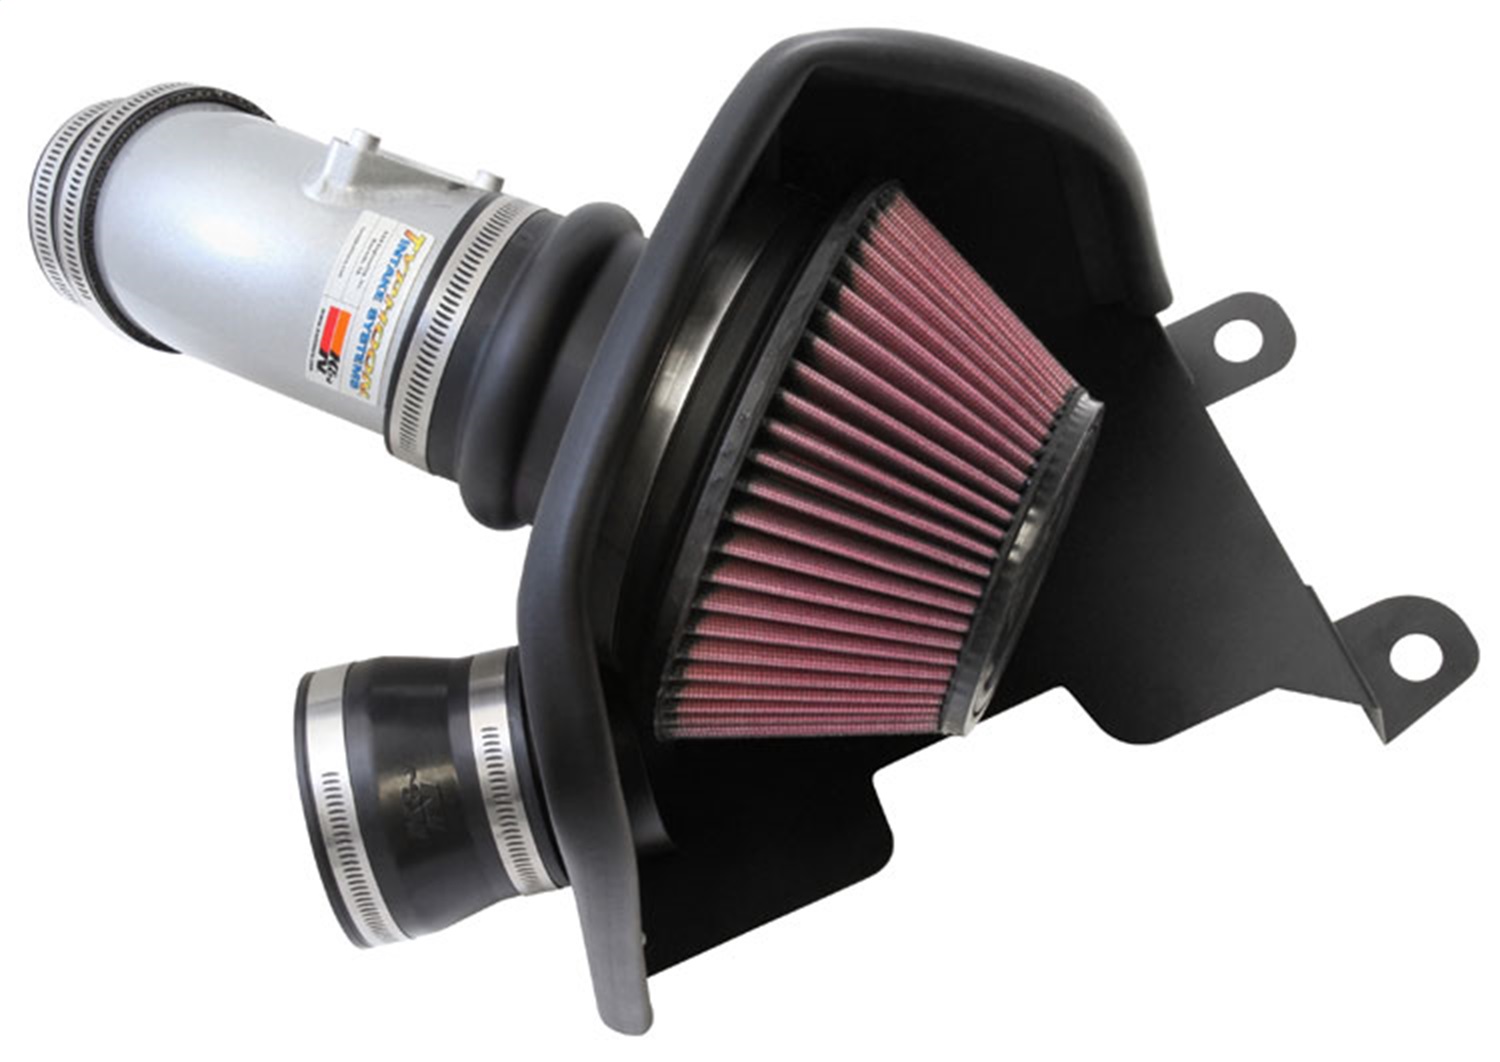 K&N Filters K&N Filters 69-1019TS Typhoon; Cold Air Intake Filter Assembly Fits Civic ILX